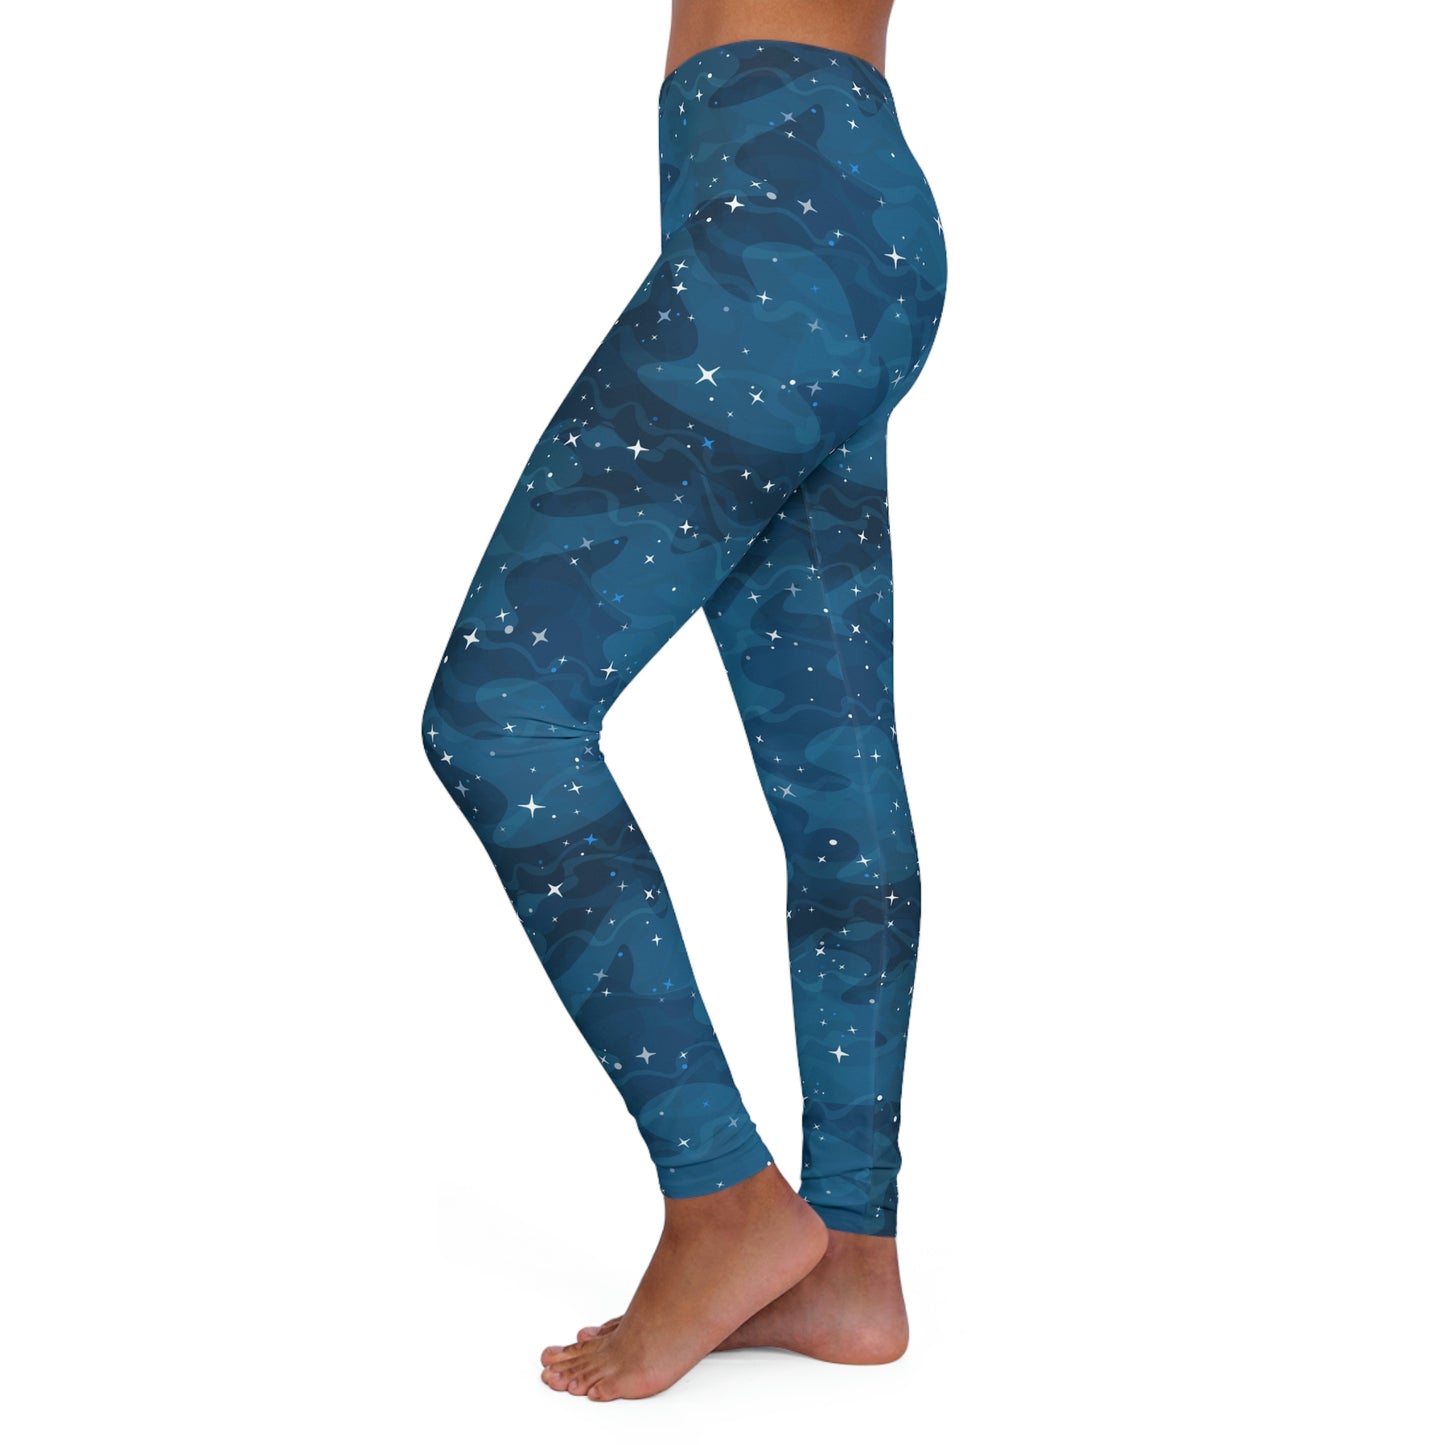 Women's Spandex Leggings One of a Kind Gift - Unique Workout Activewear tights for Wife, Best Friend . Mothers Day or Christmas Gift